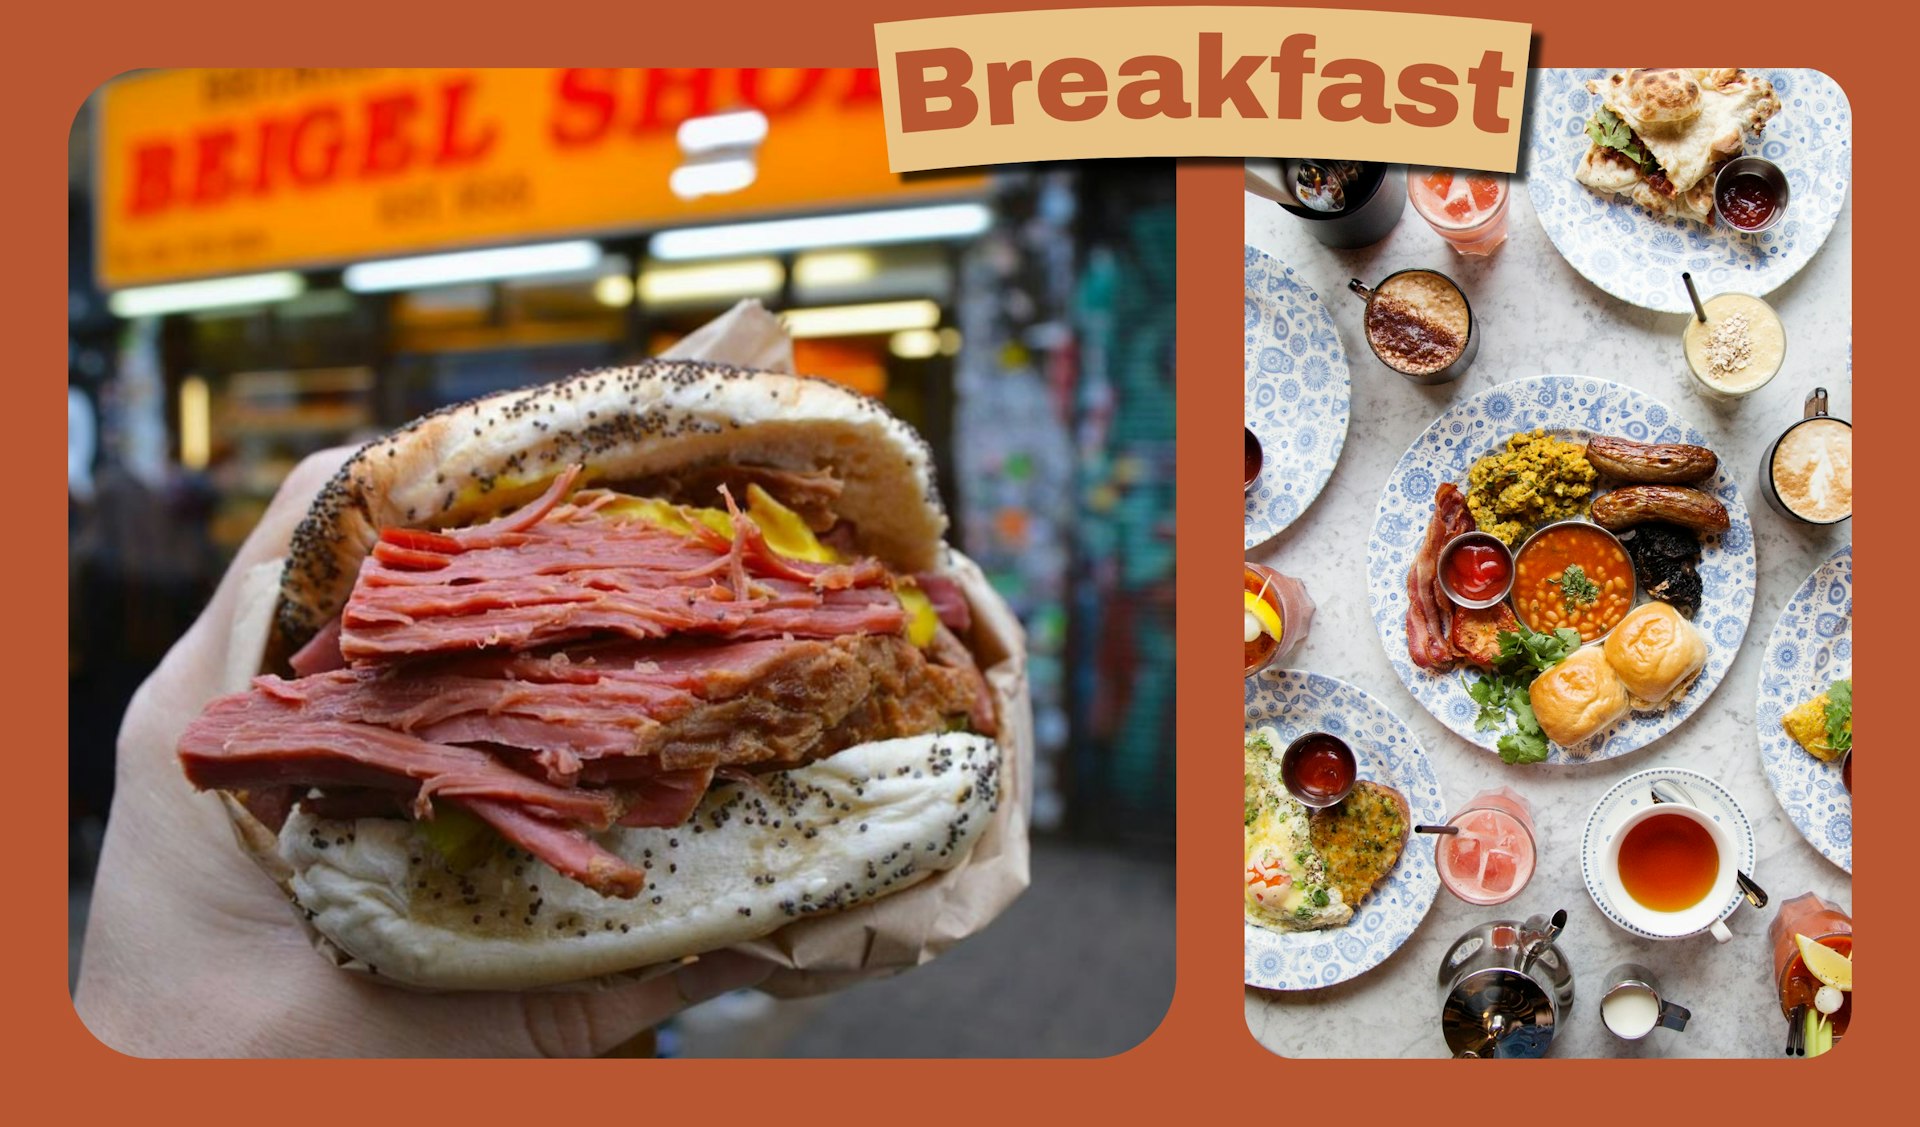 A collage of images: the first shows a salt beef bagel from London's Beigel Shop and the second shows breakfast at Dishoom